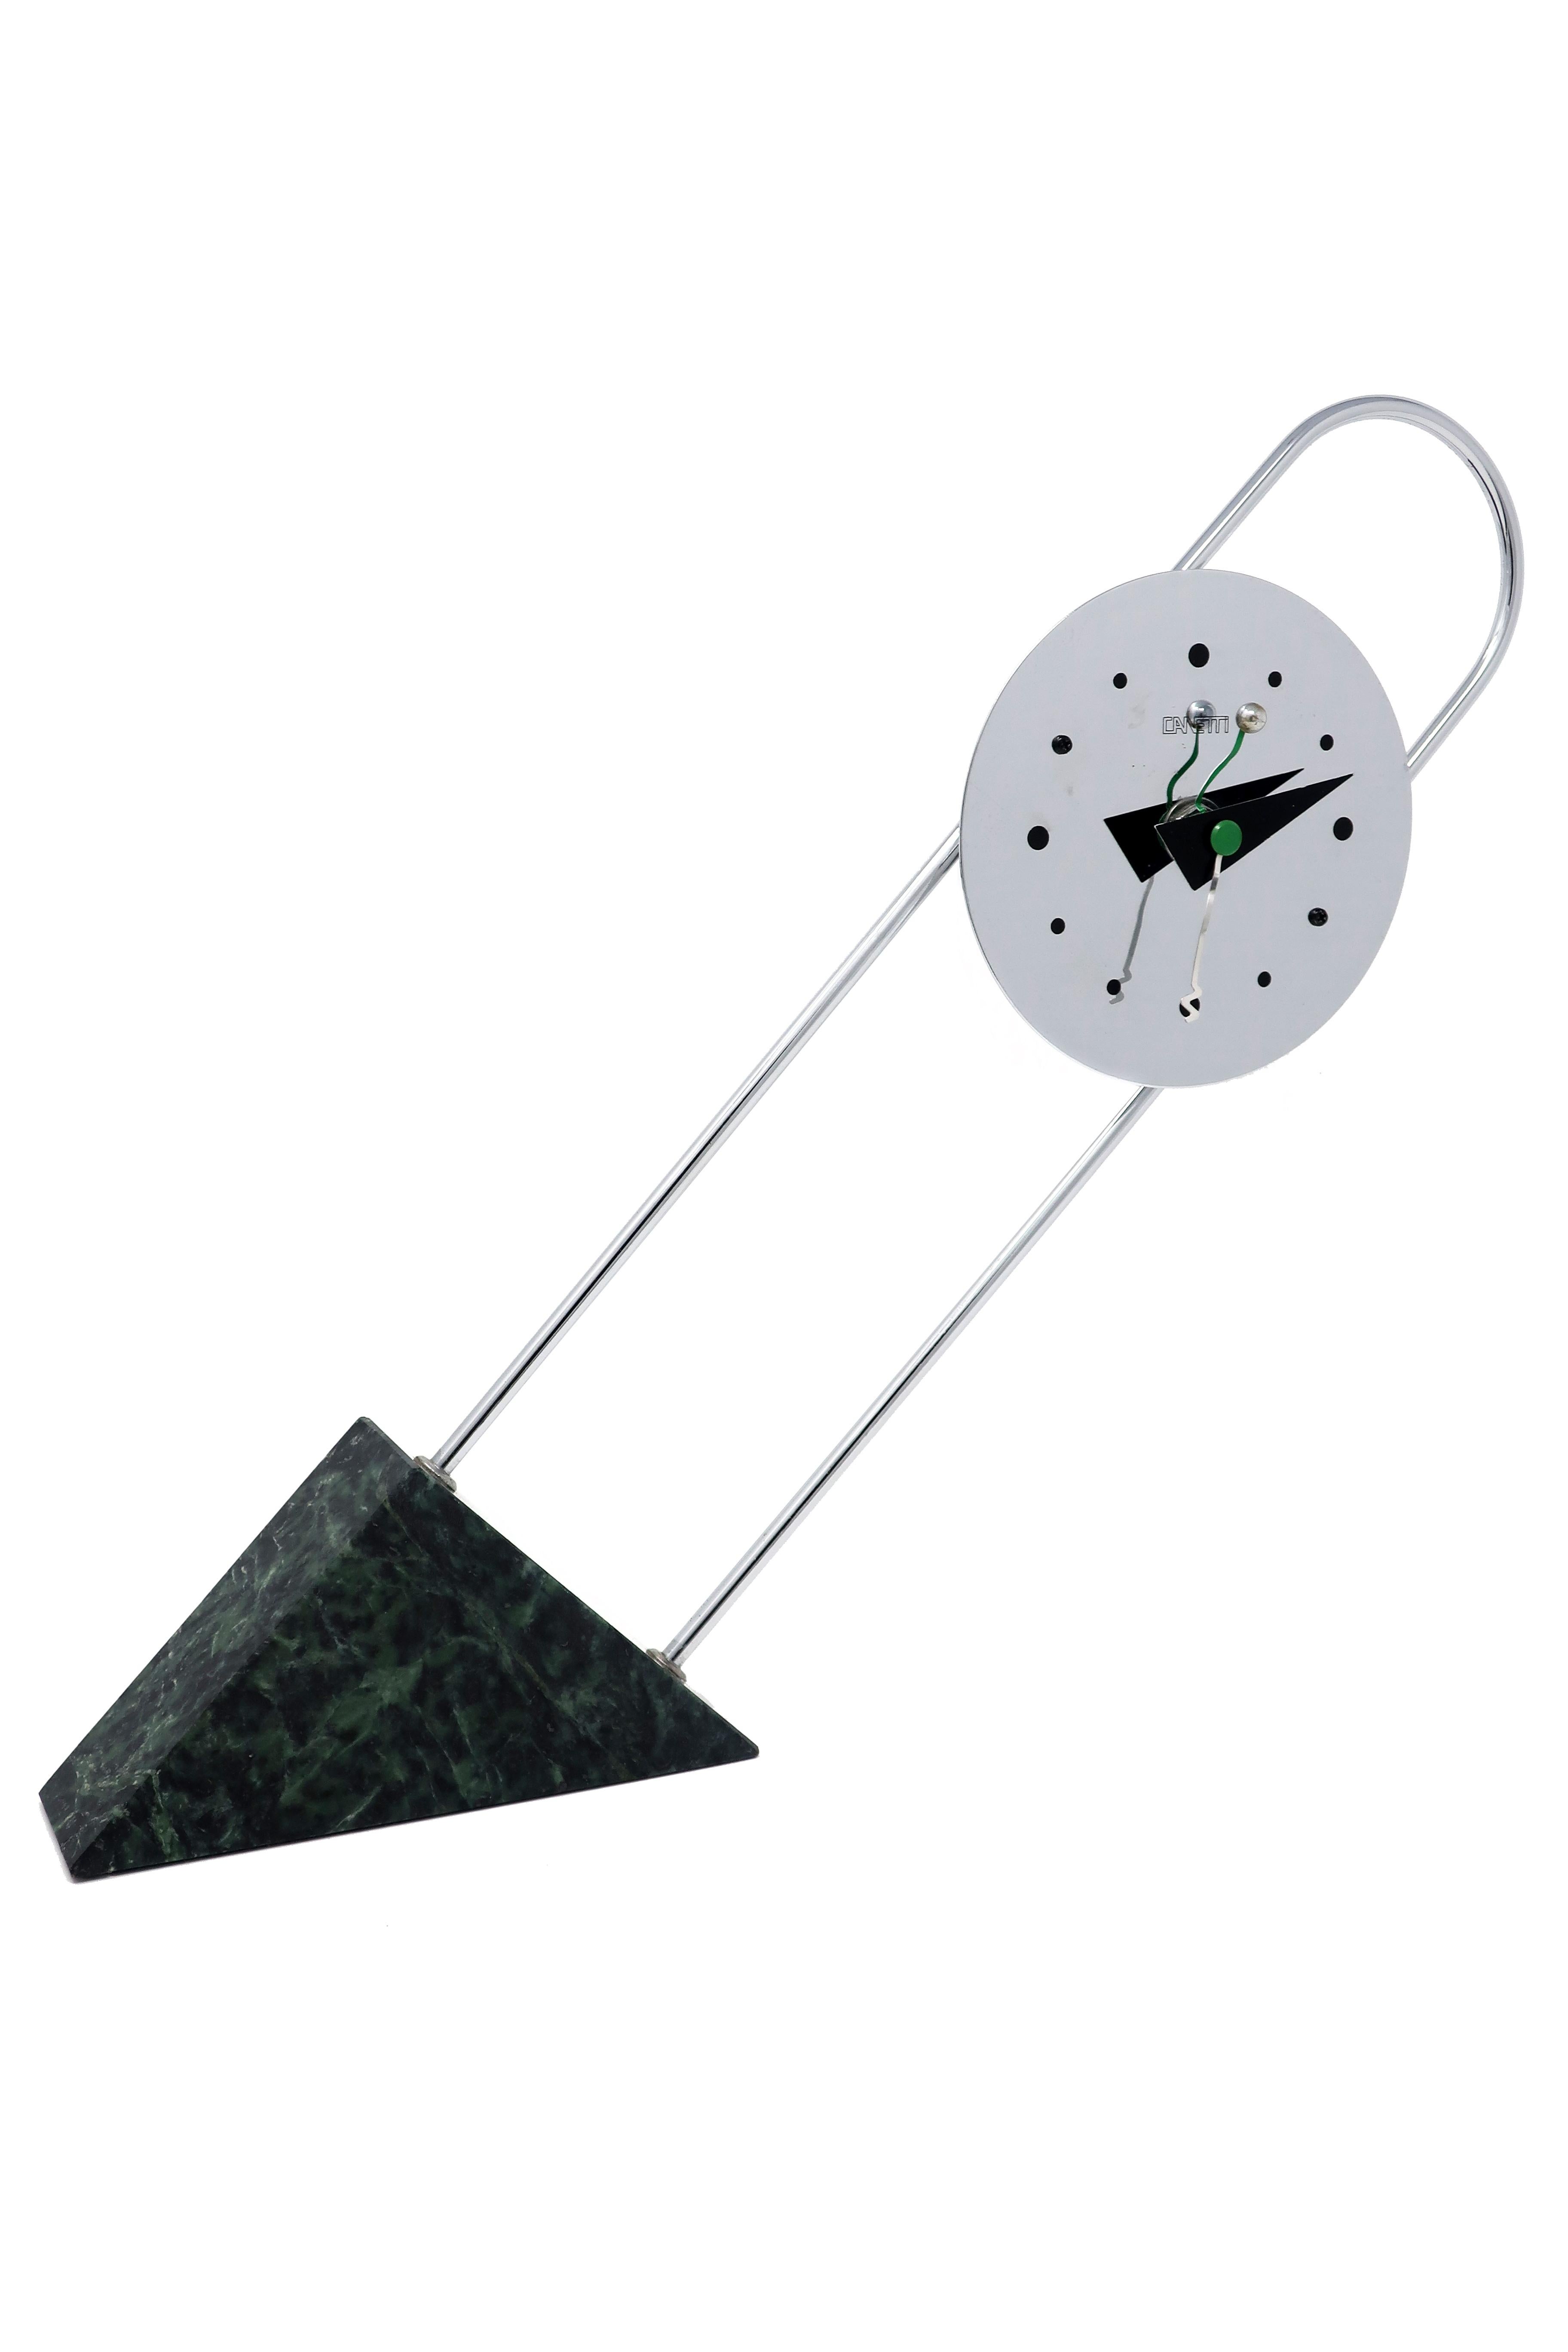 A stunning Postmodern clock by Canetti with a chrome face on an arching chrome stem set at an angle into a green marble base. Dated 1989, this clock screams its Memphis inspiration from the use of primary shapes to the quirky shapes of the clock’s